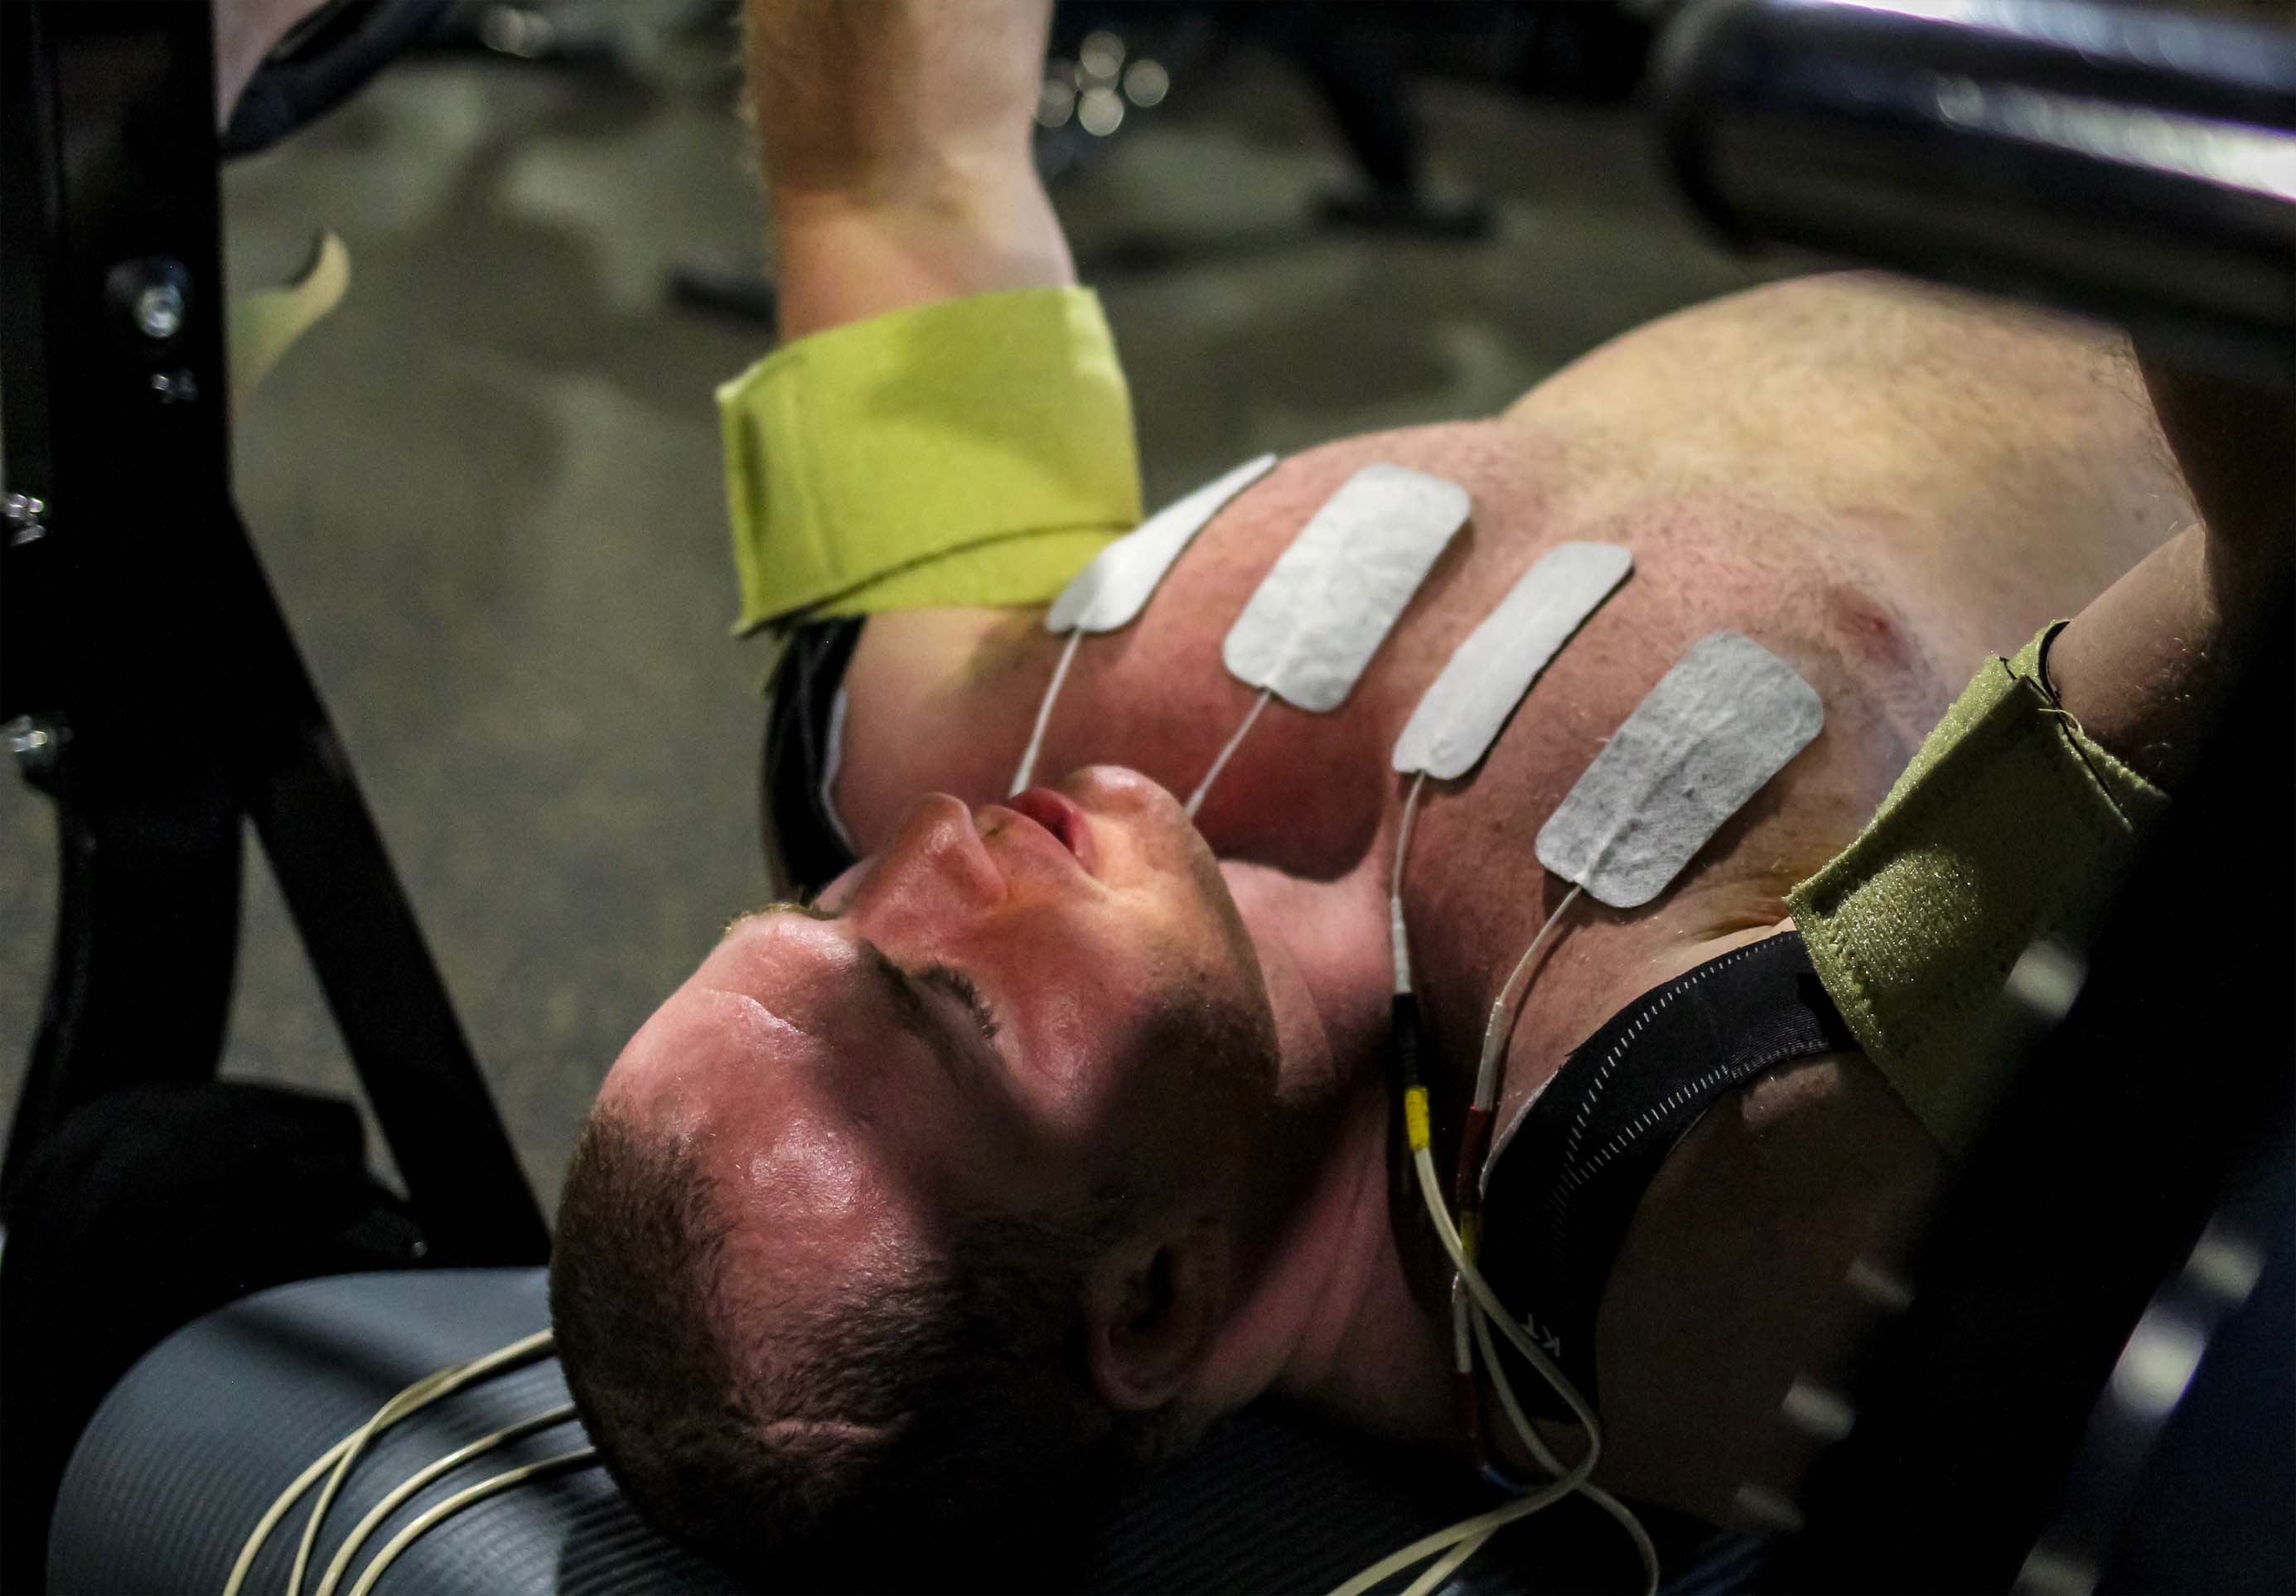 NEW Device Improves Injury, Increases Muscle Mass And Endurance